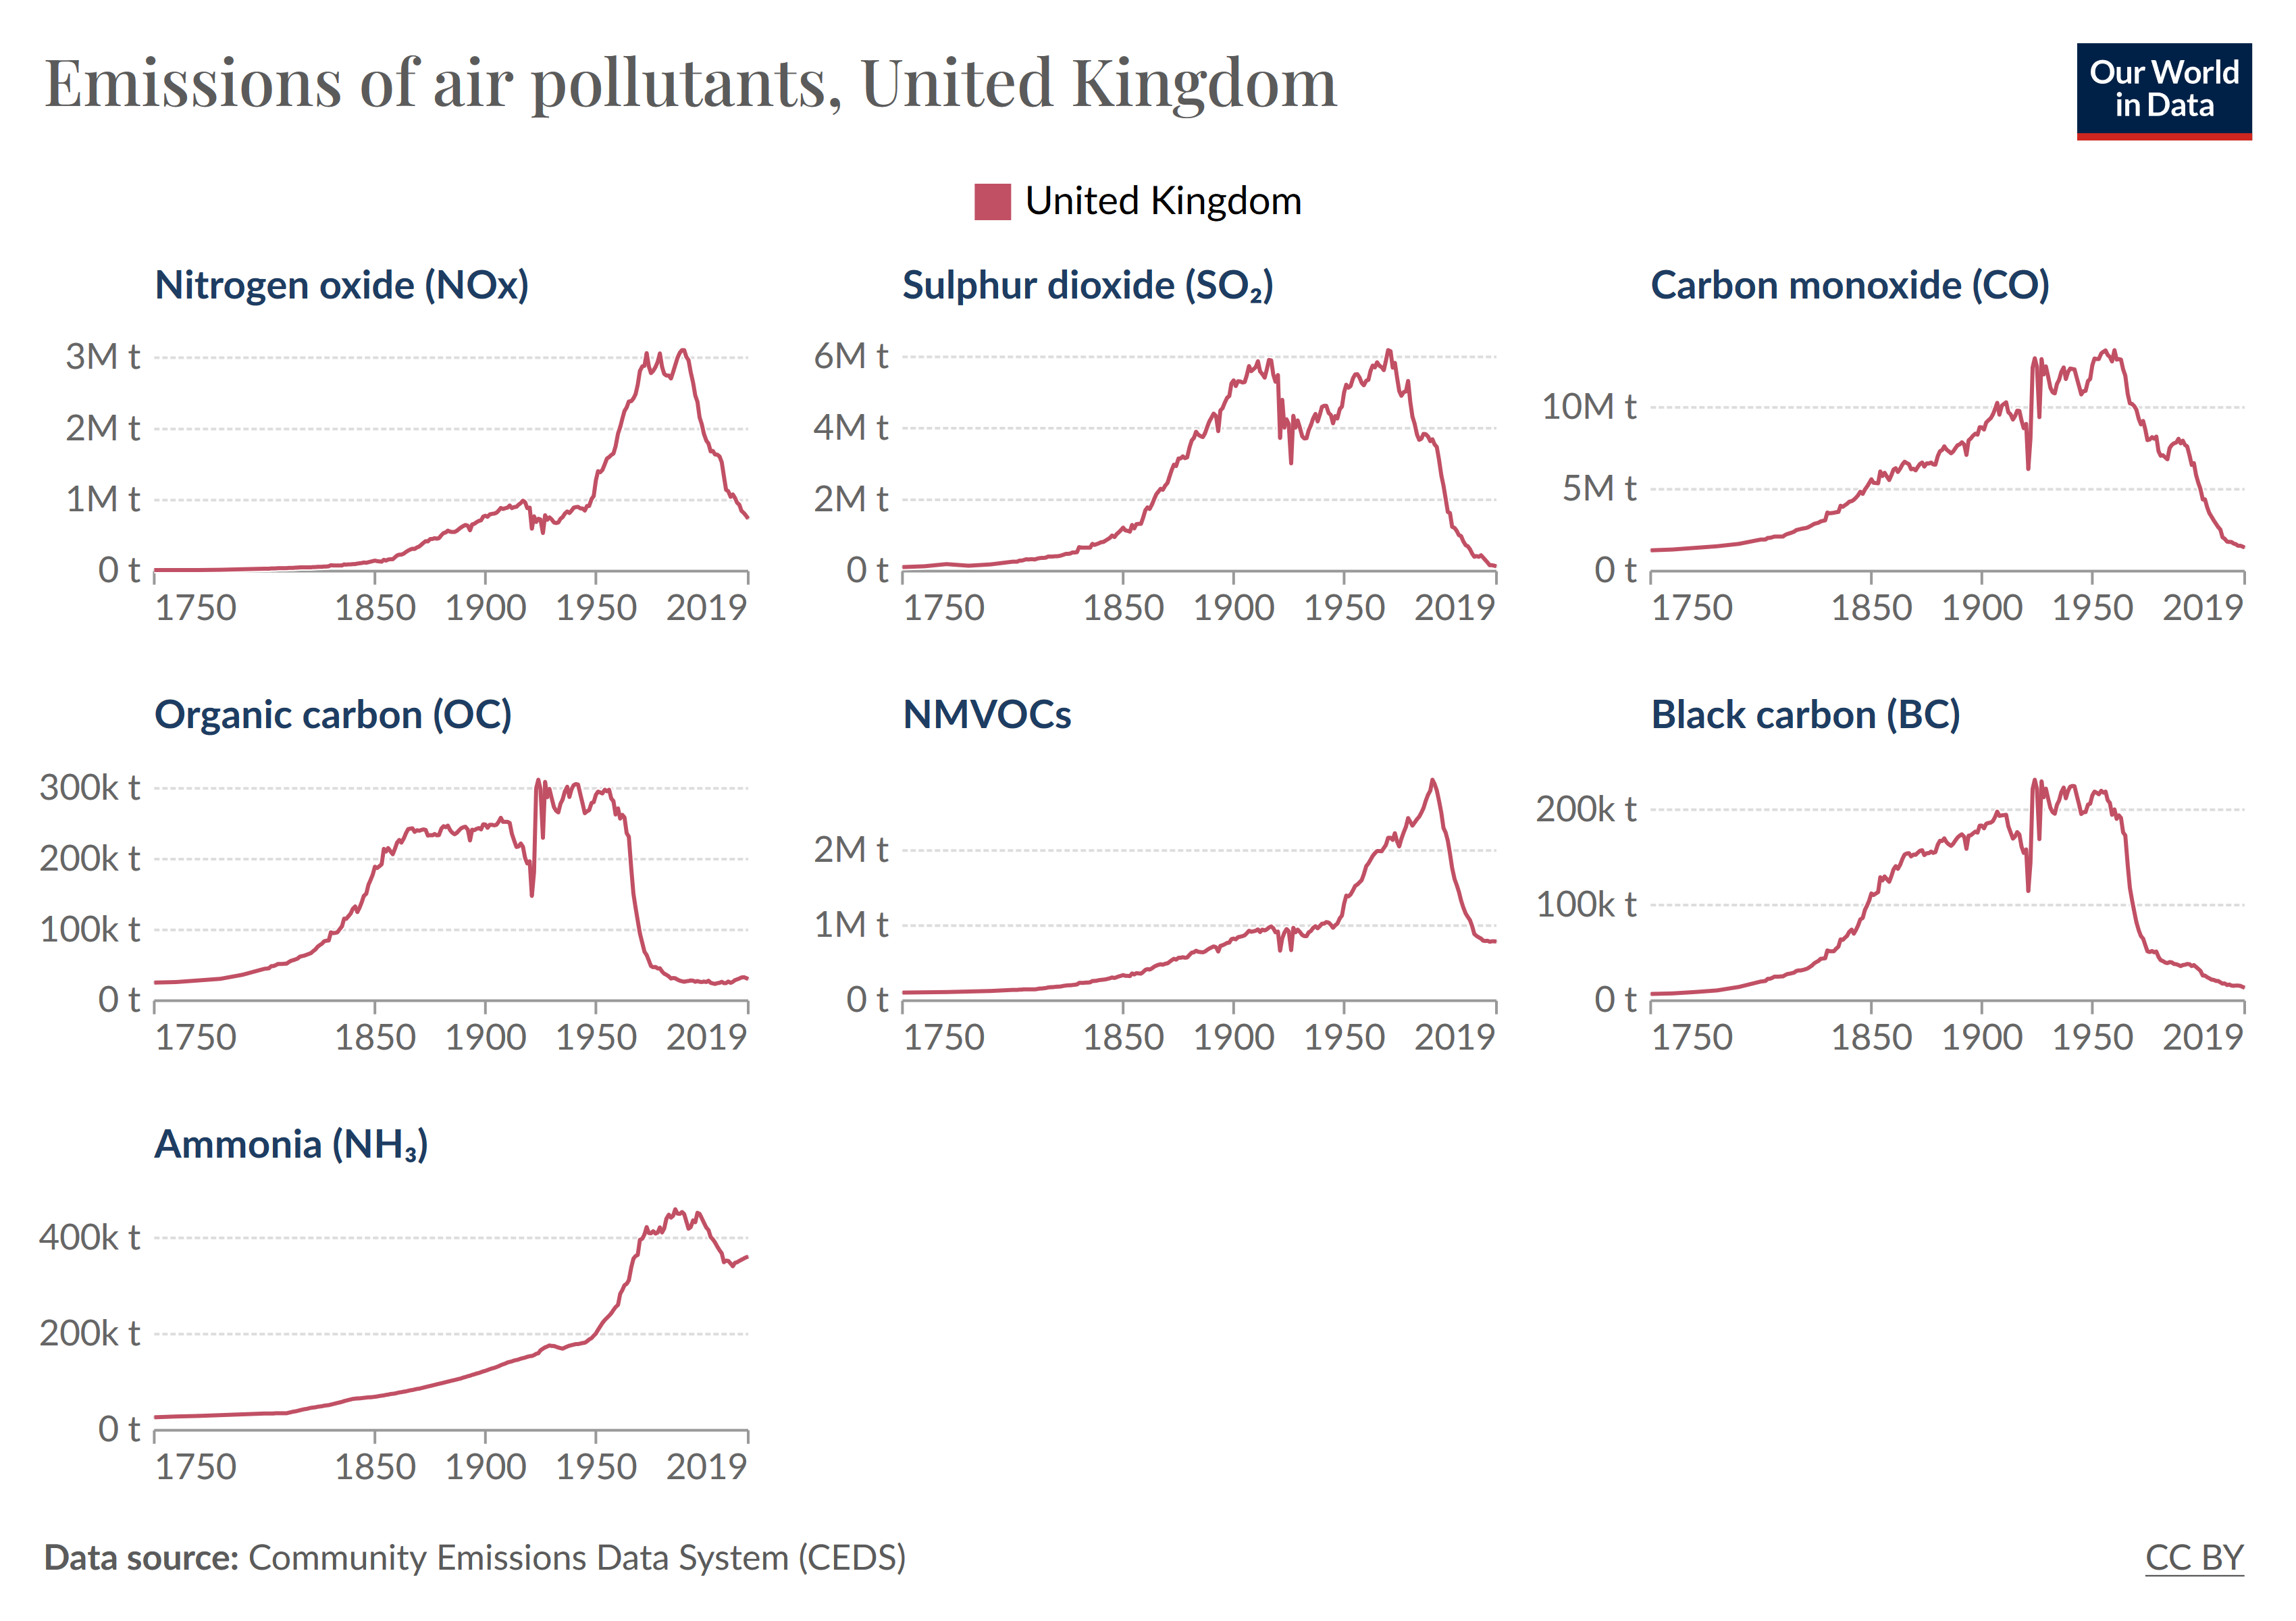 A chart showing the emissions of several pollutants over time in the UK.